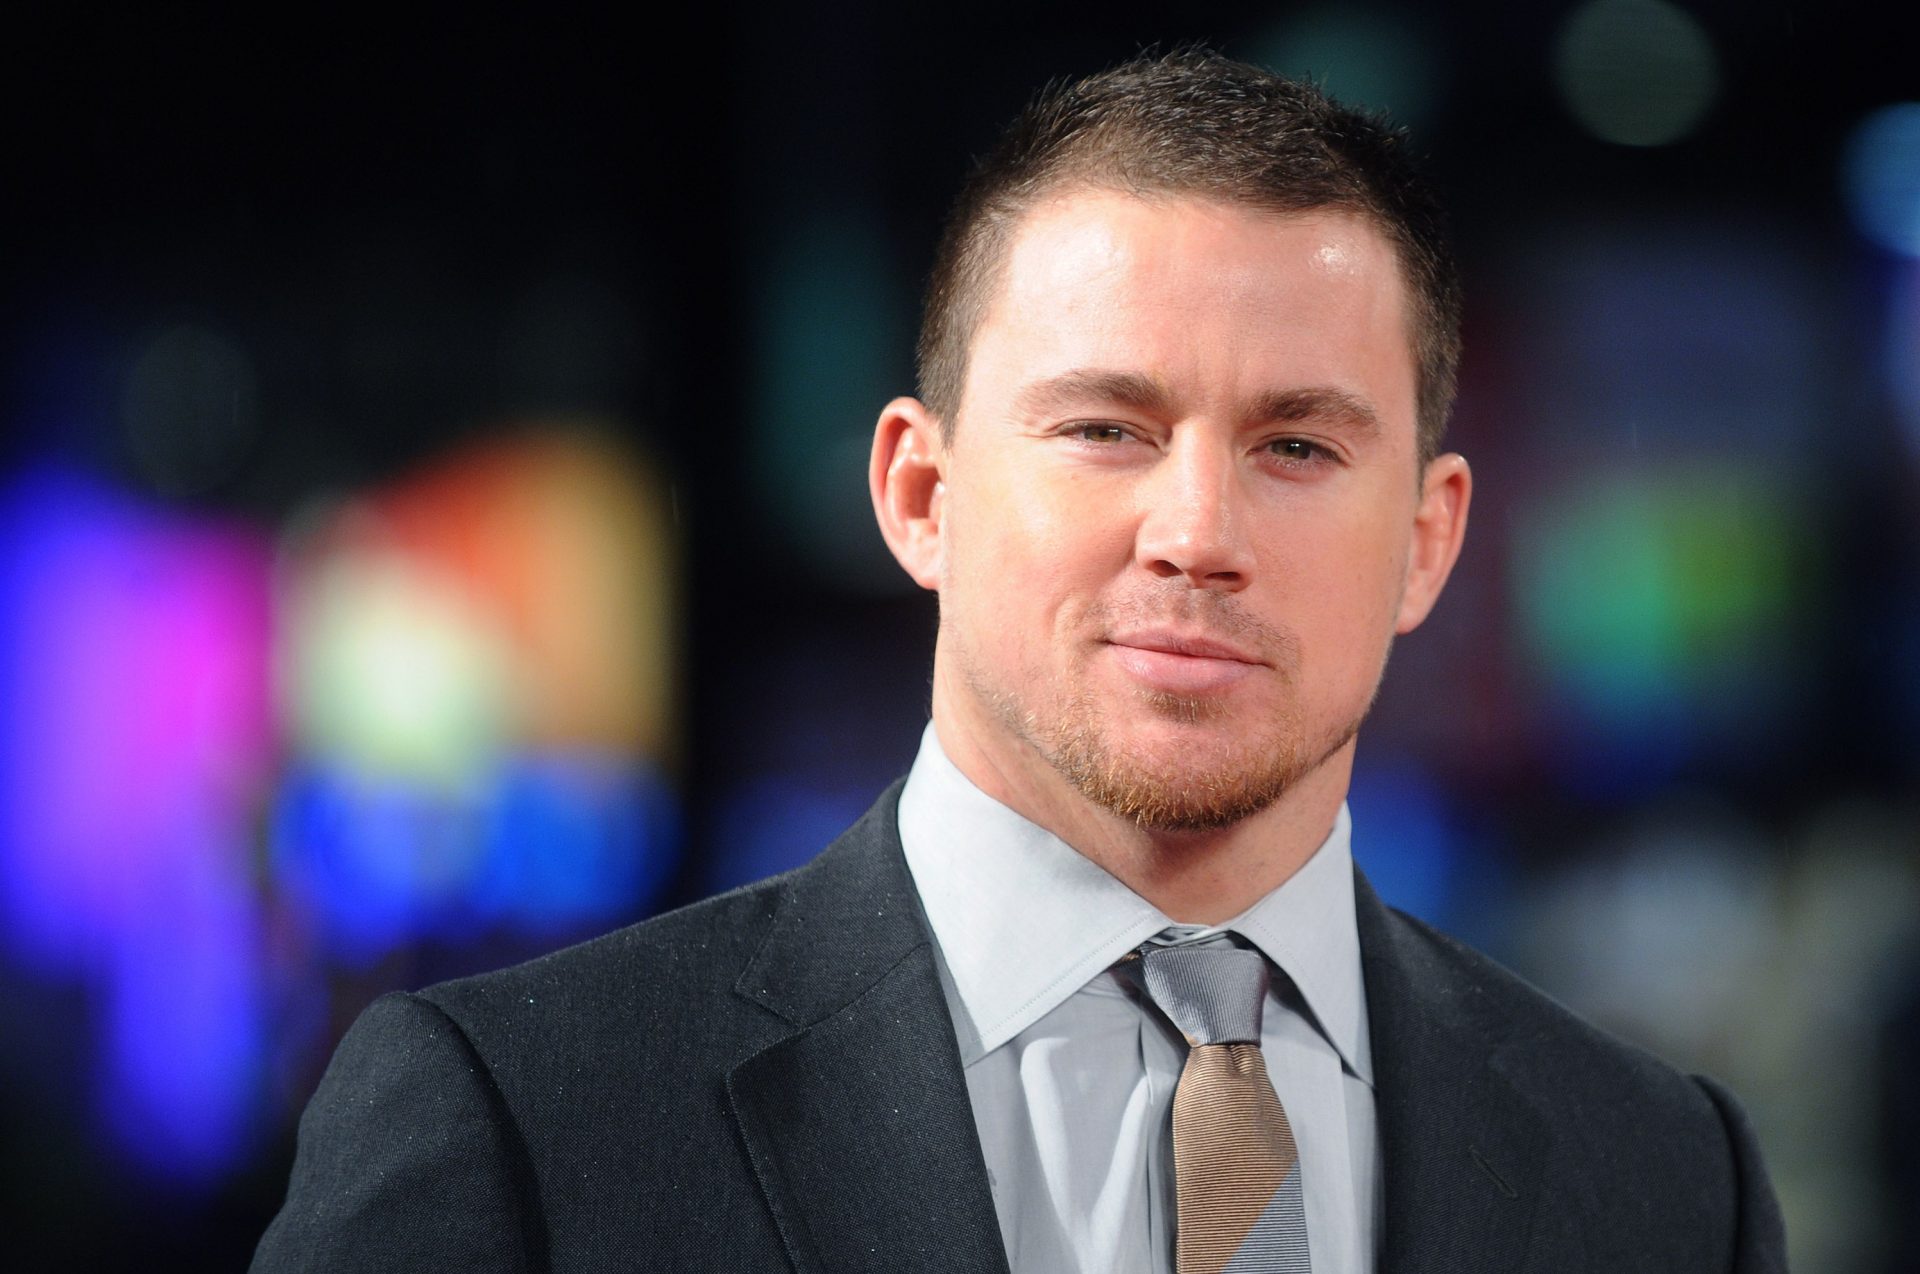 Channing Tatum Shared a Photo of His Daughter Everly’s Face for the First Time